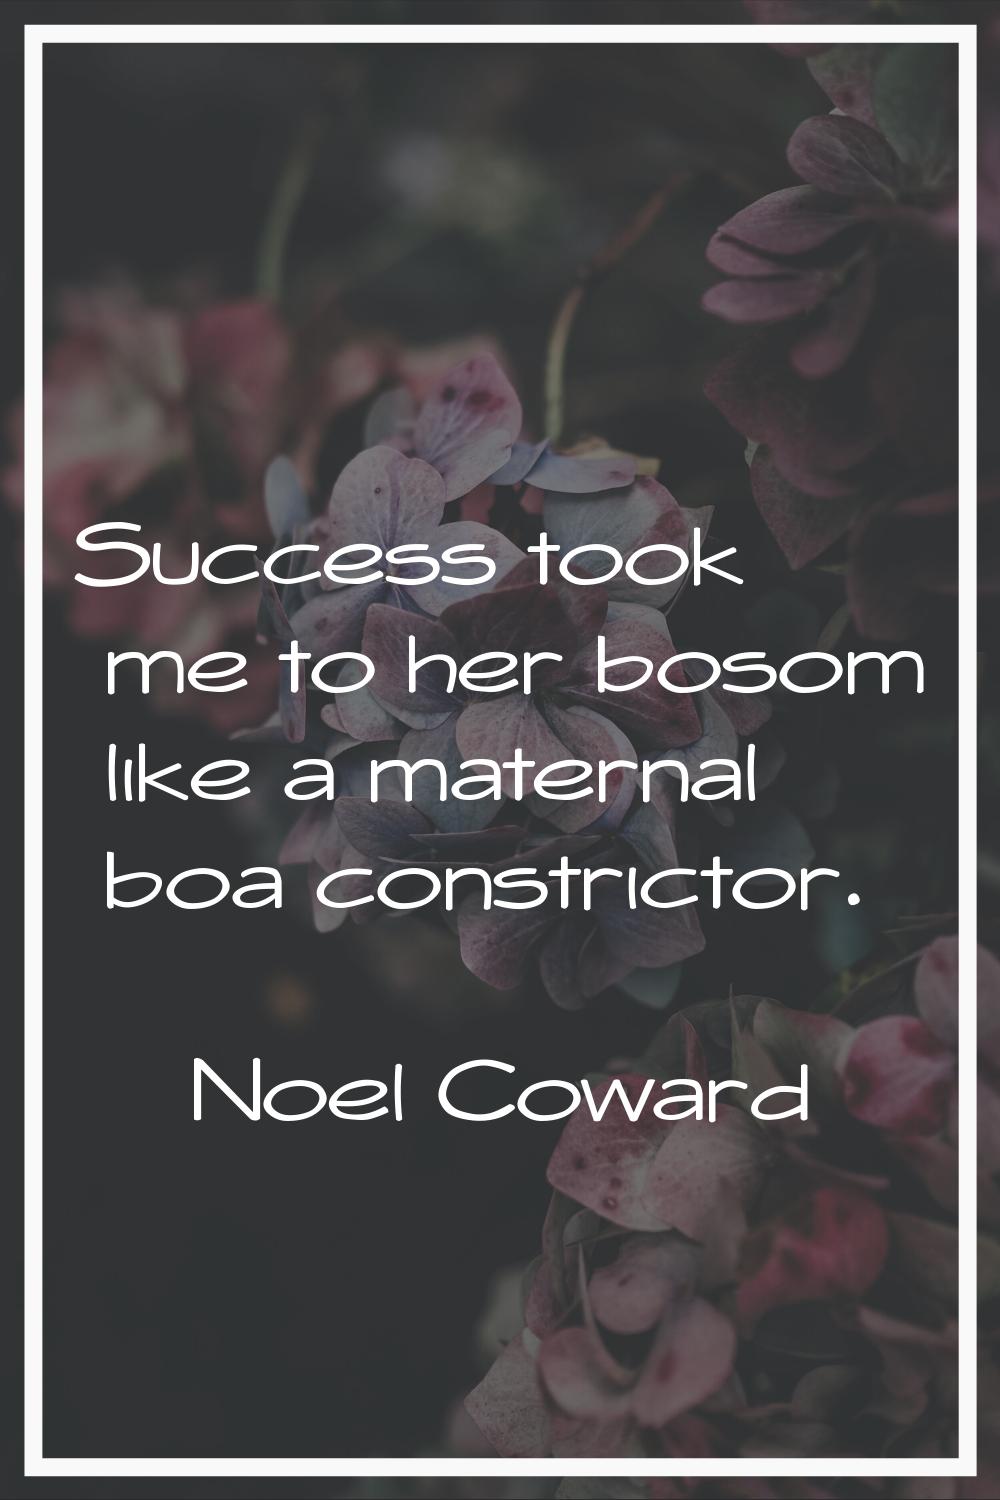 Success took me to her bosom like a maternal boa constrictor.